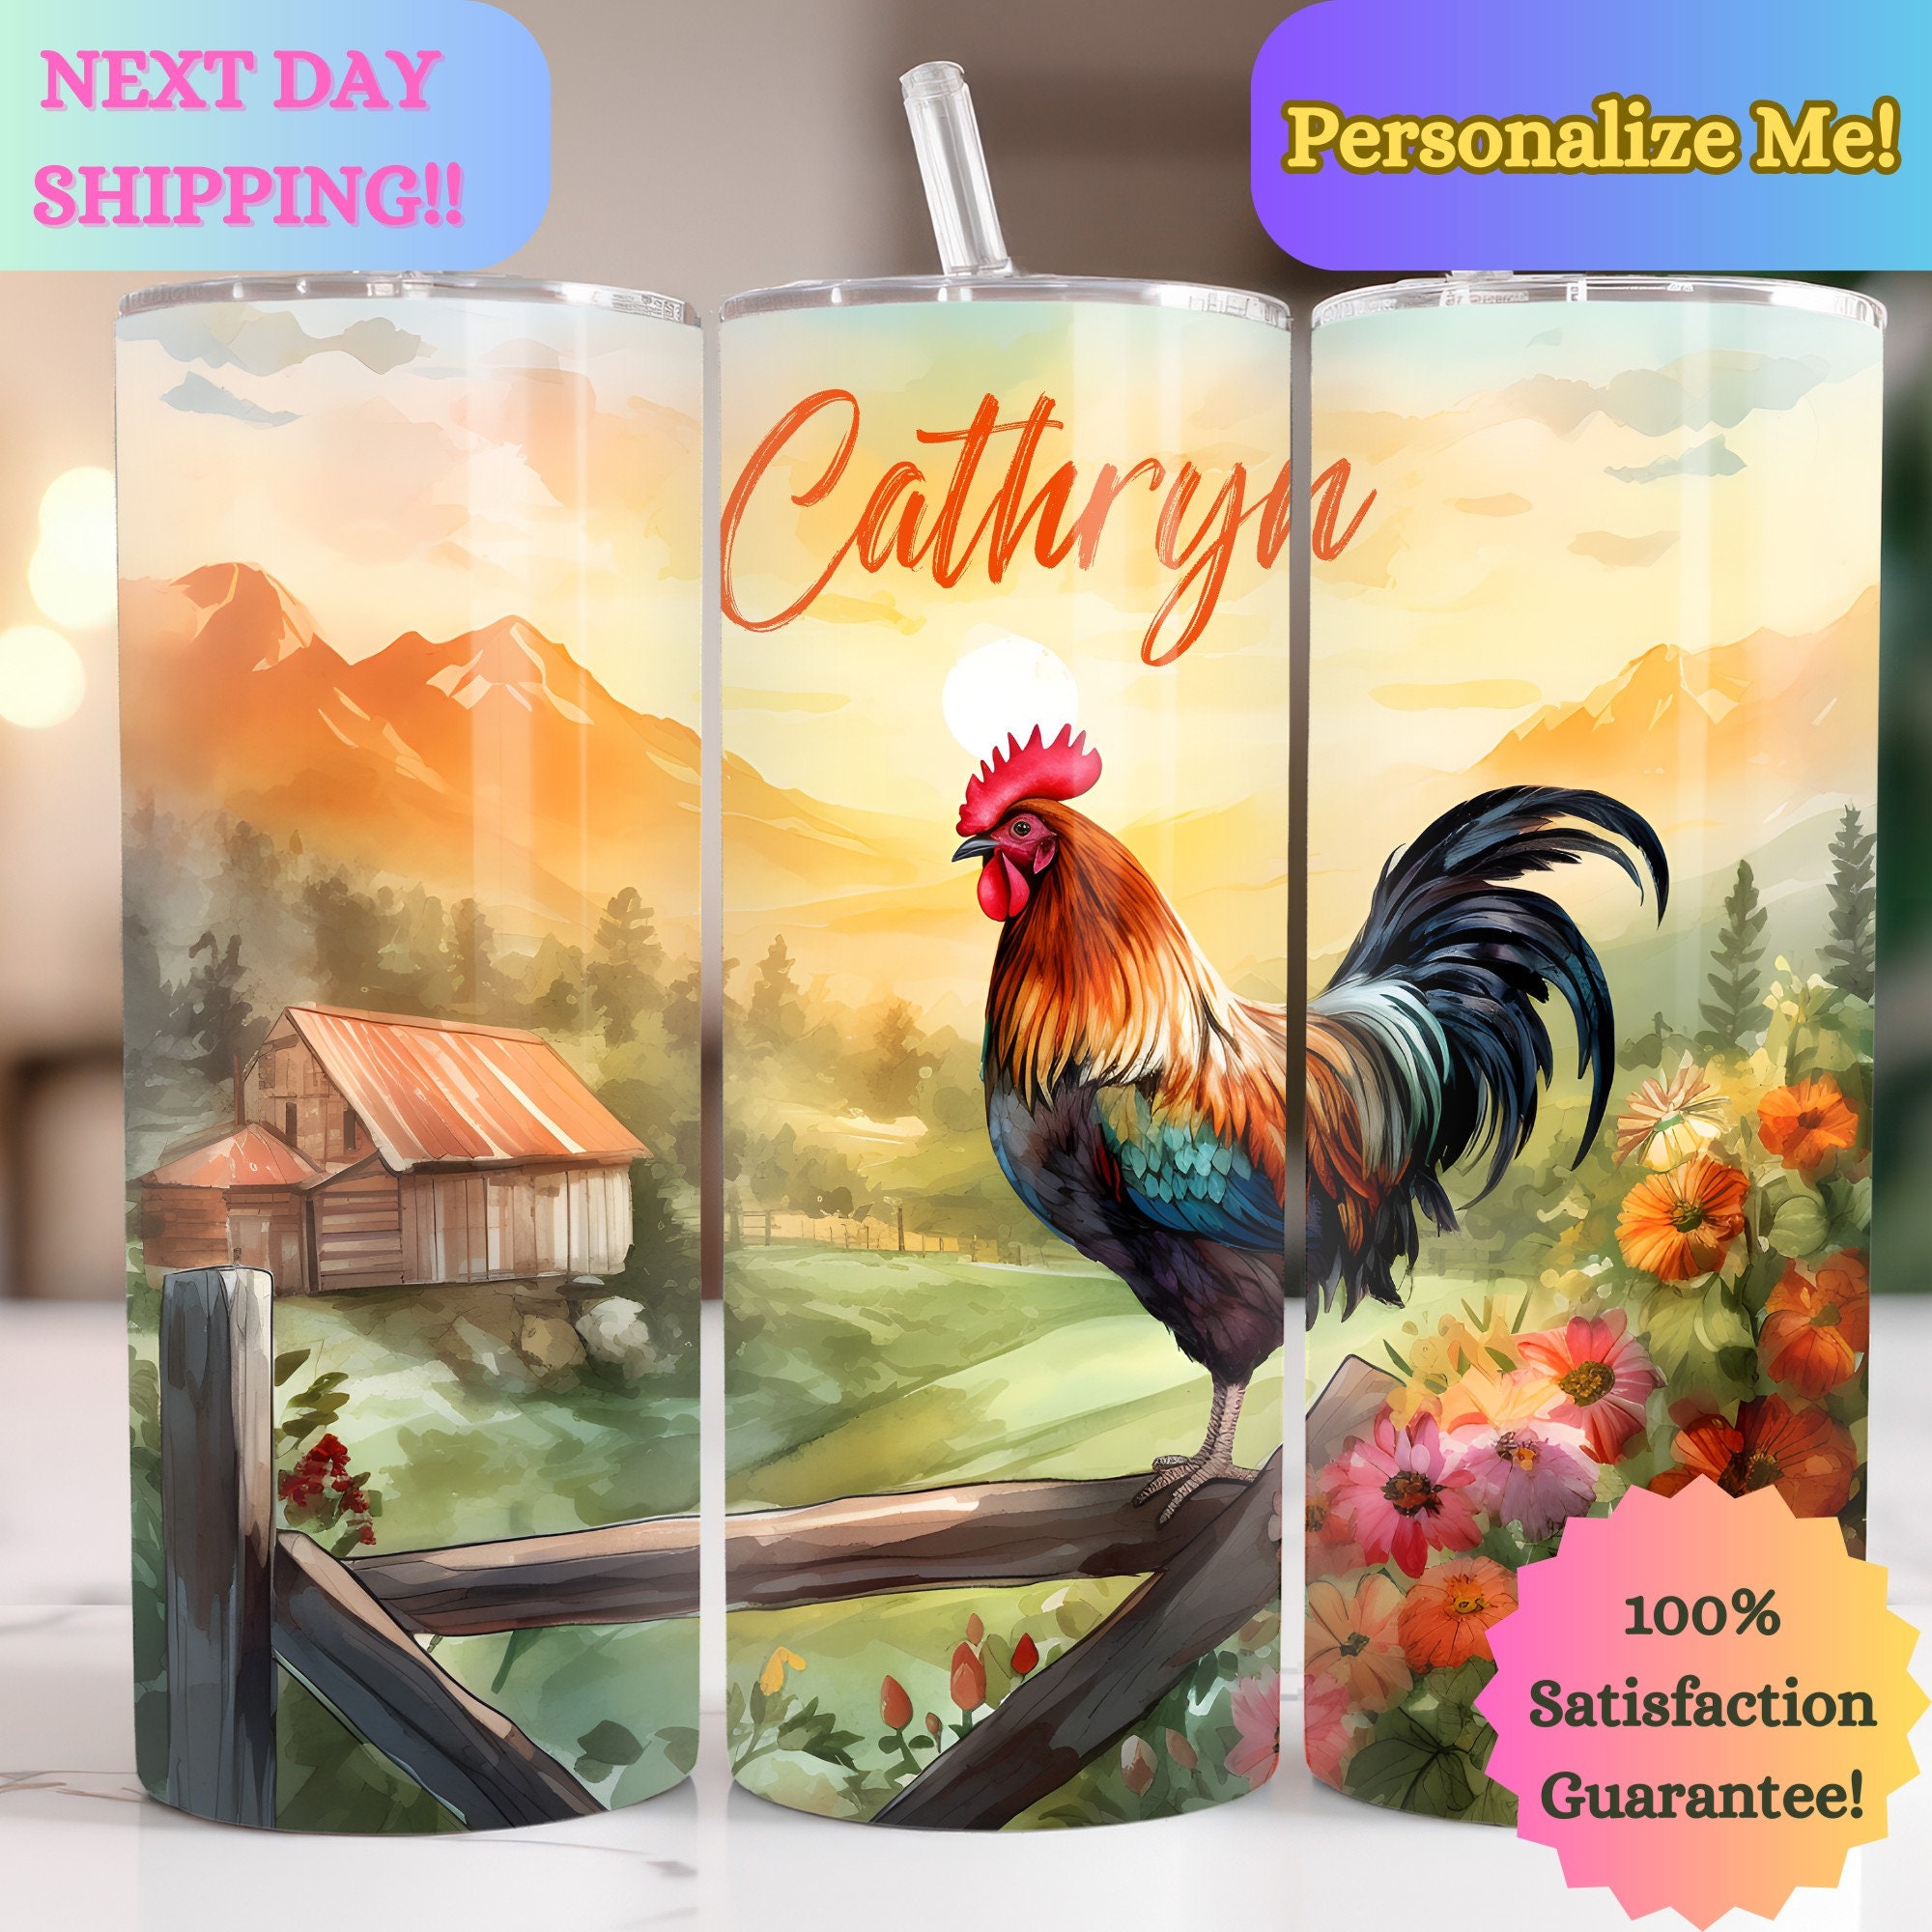 40 oz Tumbler with Handle and Straw Lid Leak Proof, Chicken and Rooster  Design Coffee Travel Mug with Handle Insulated for Hot and Cold Drink Ice,  Birthday Gifts for Women Chicken Lovers 